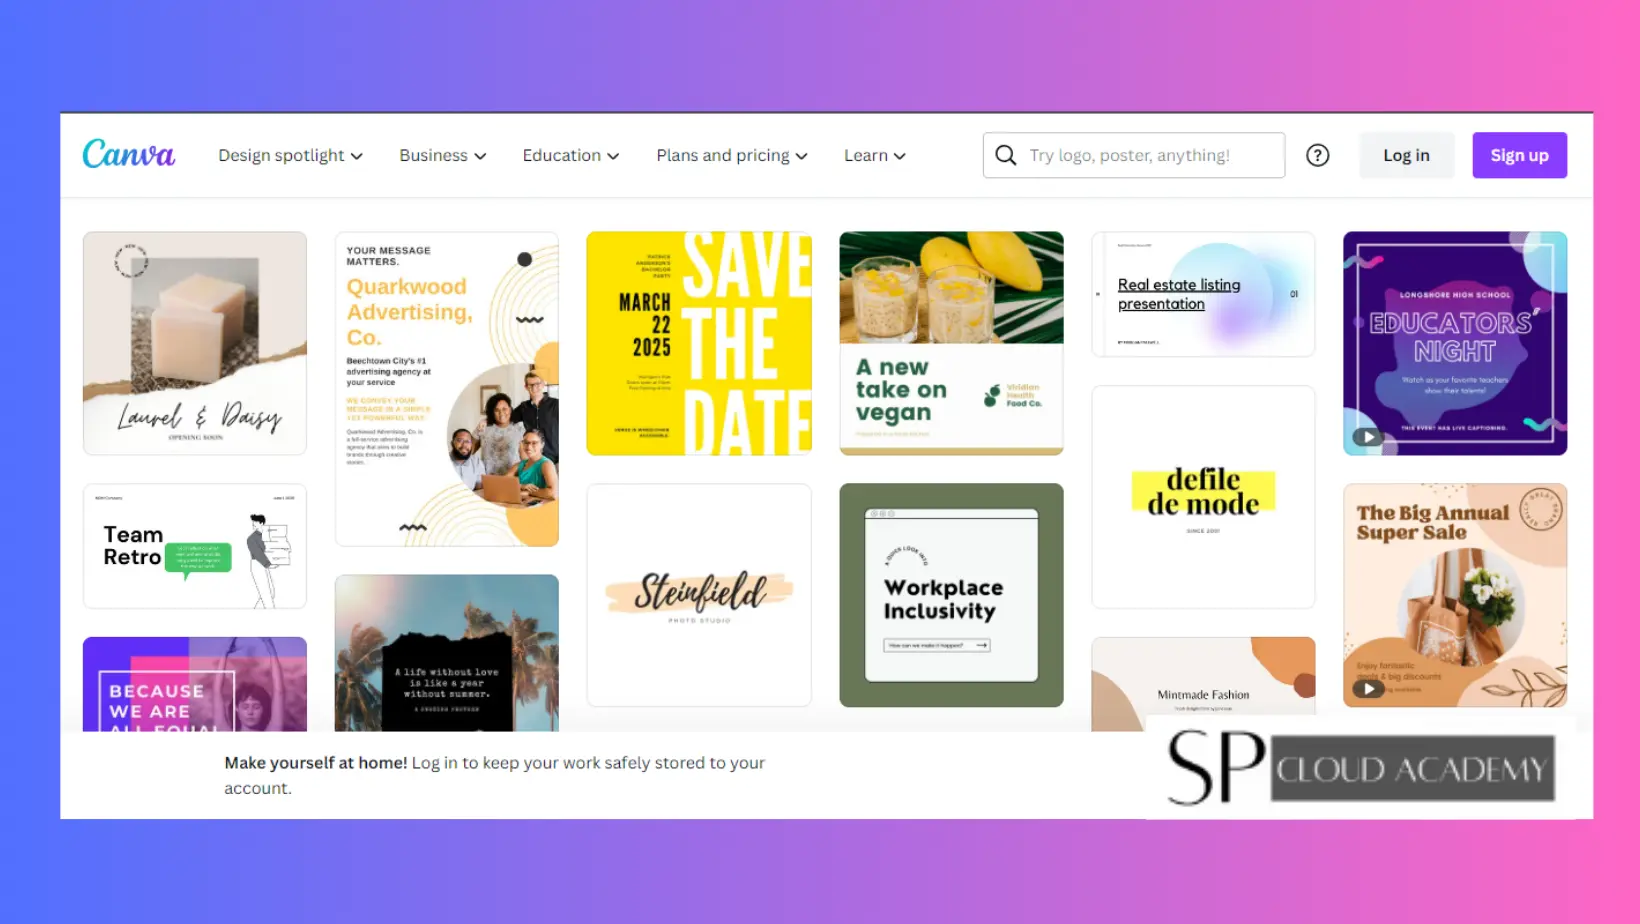 Canva is an educational and personal branding tool